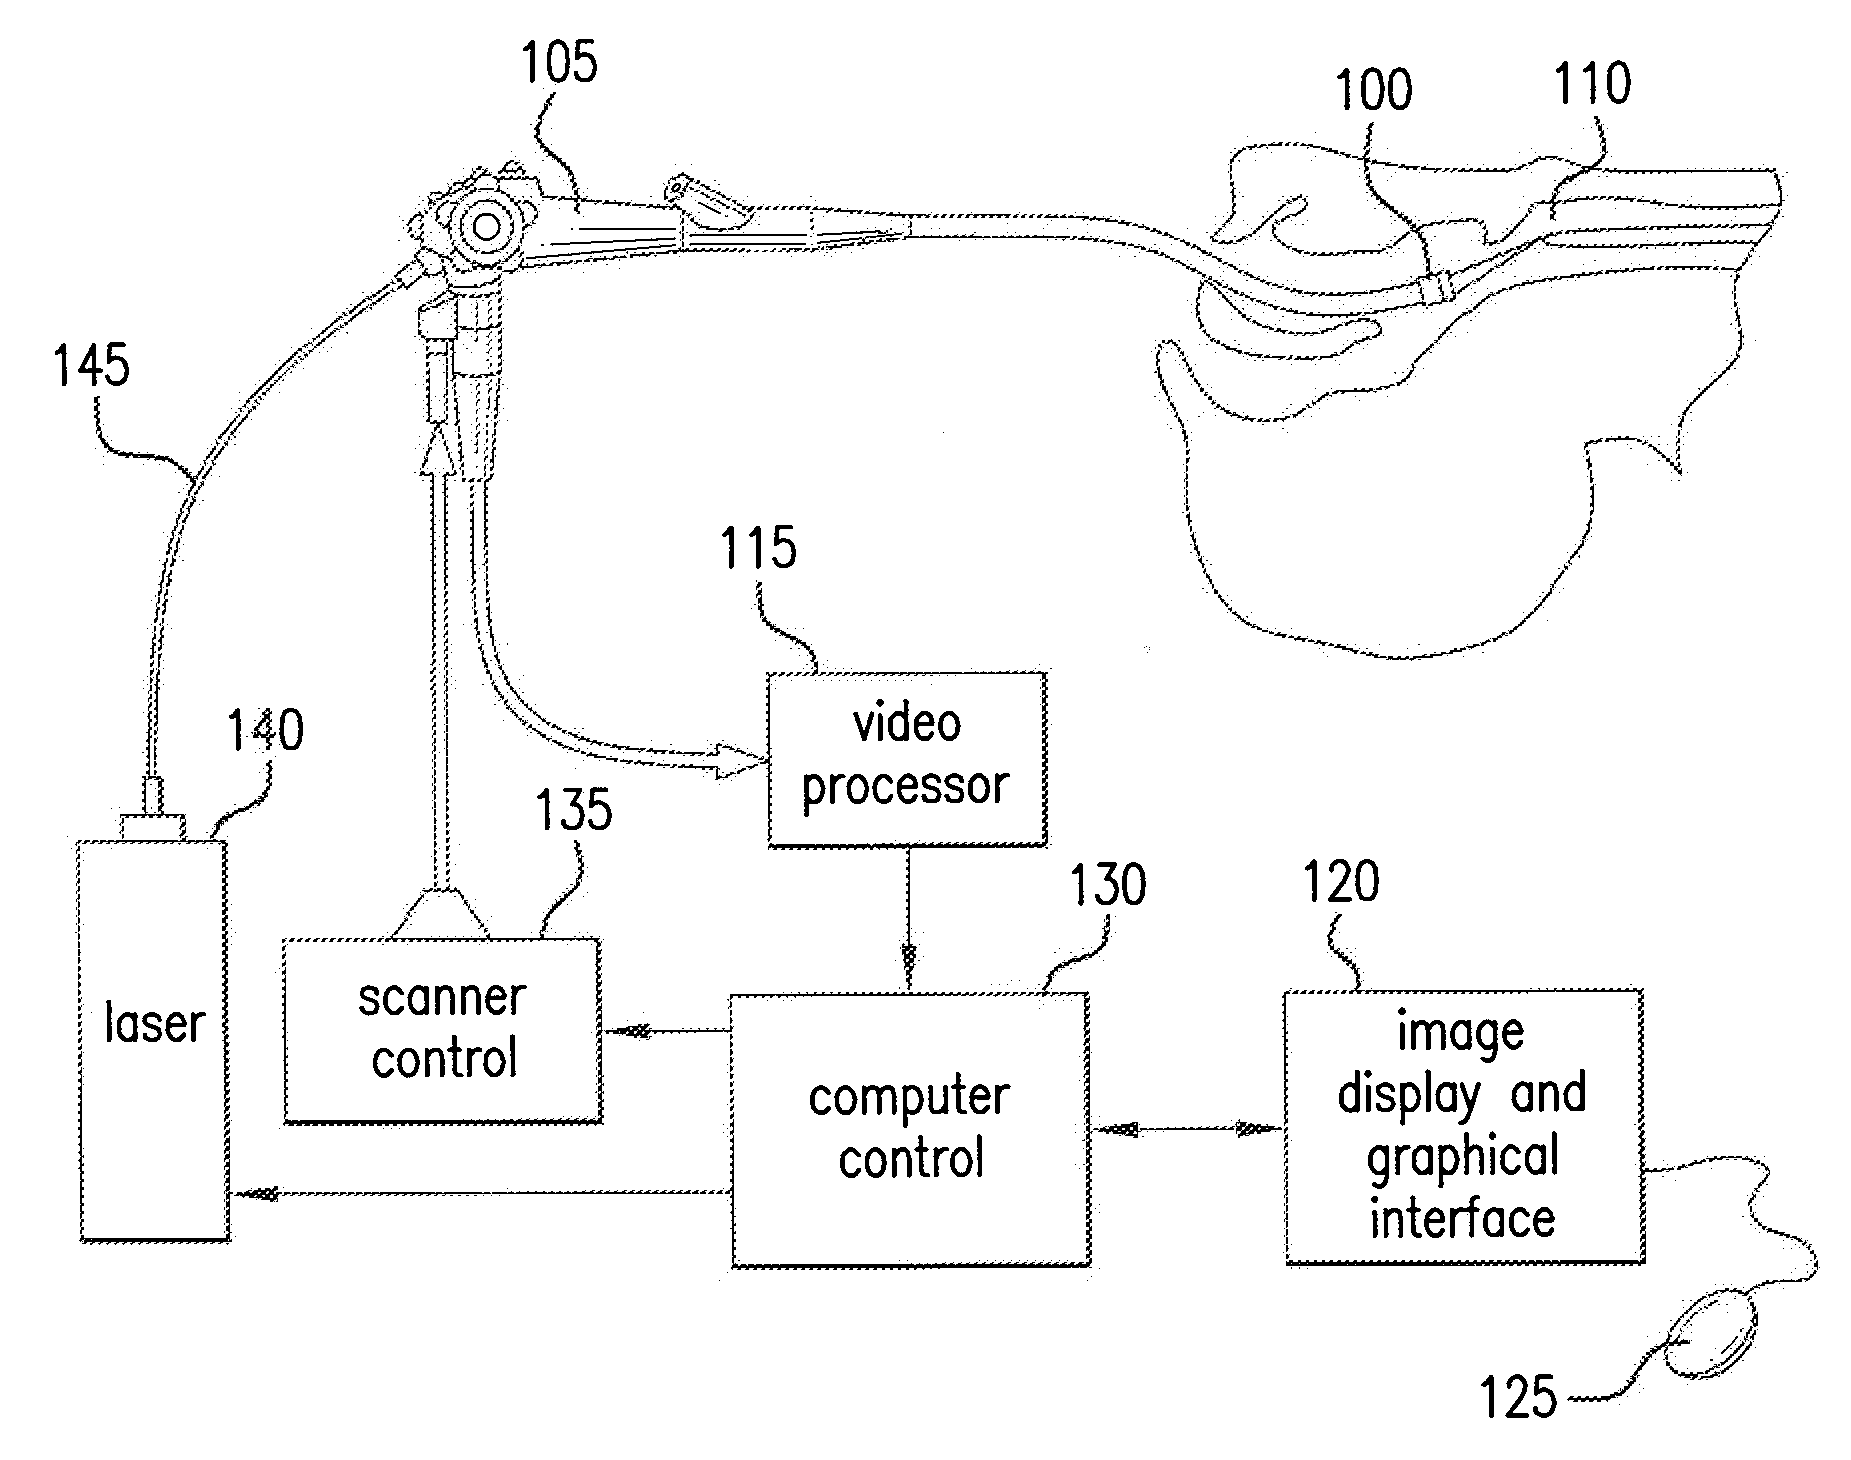 Apparatus, system and method for providing laser steering and focusing for incision, excision and ablation of tissue in minimally-invasive surgery